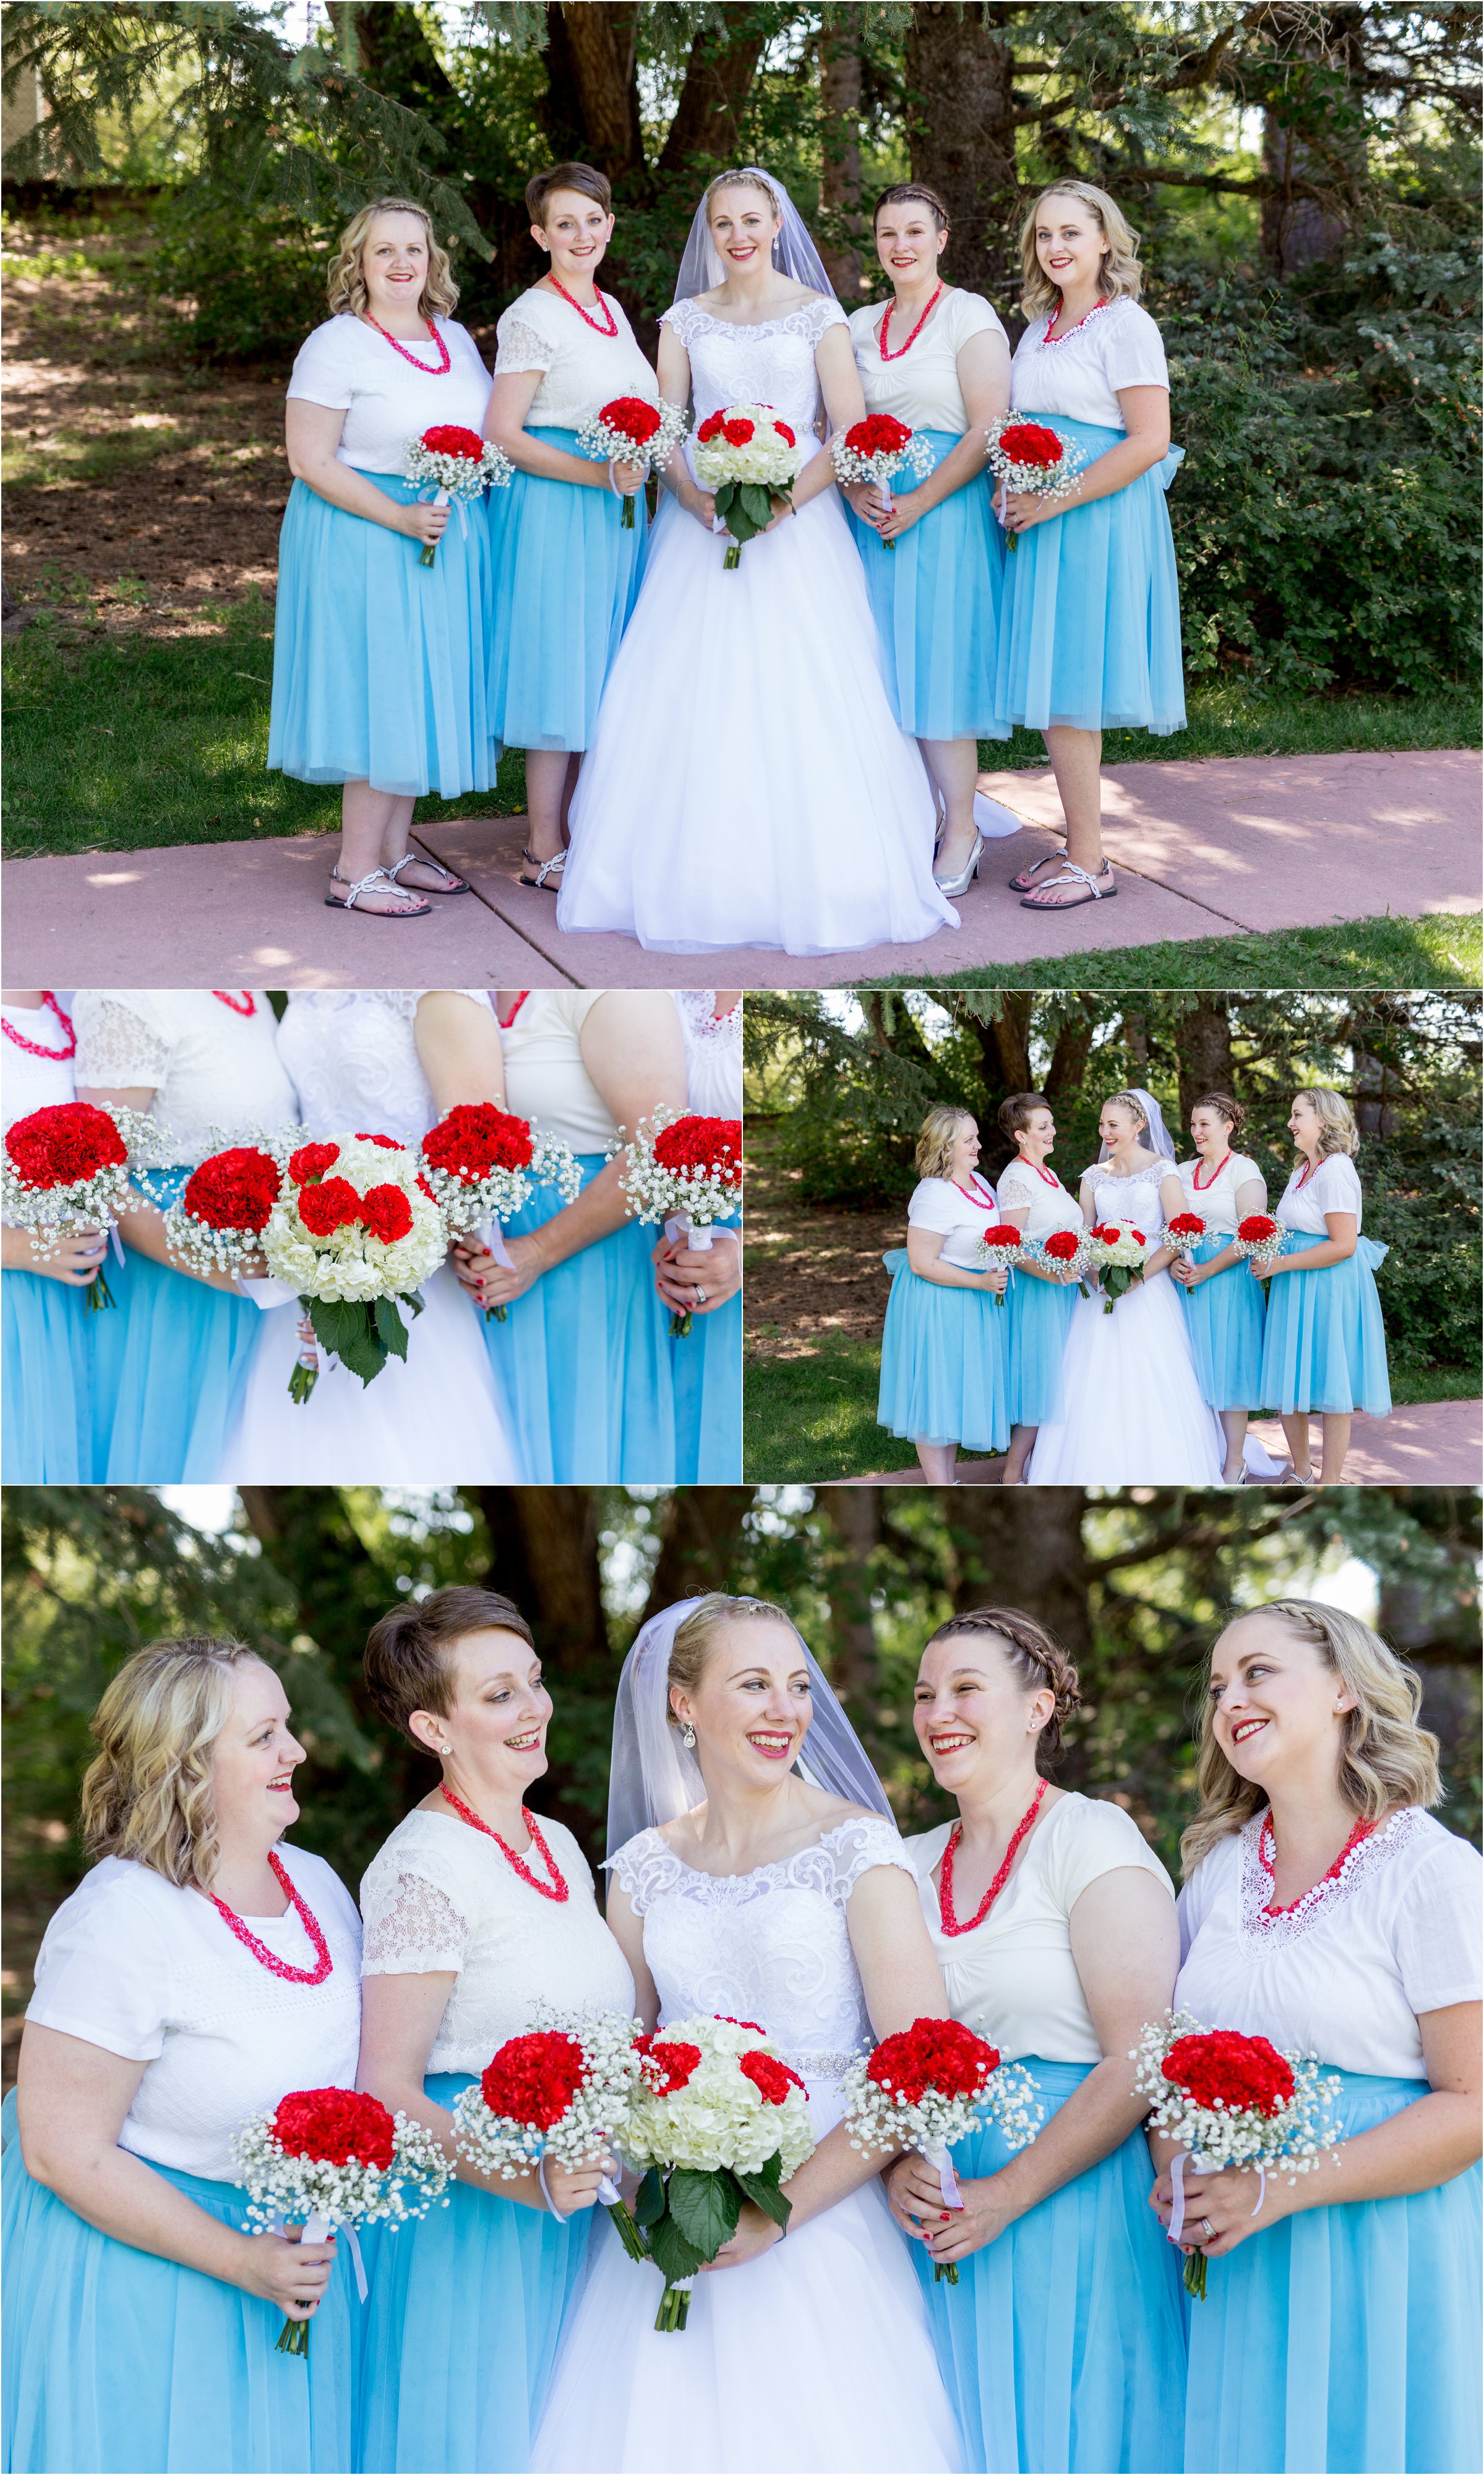 bride poses with her bridesmaids in blue skirts with red and white floral bouquets